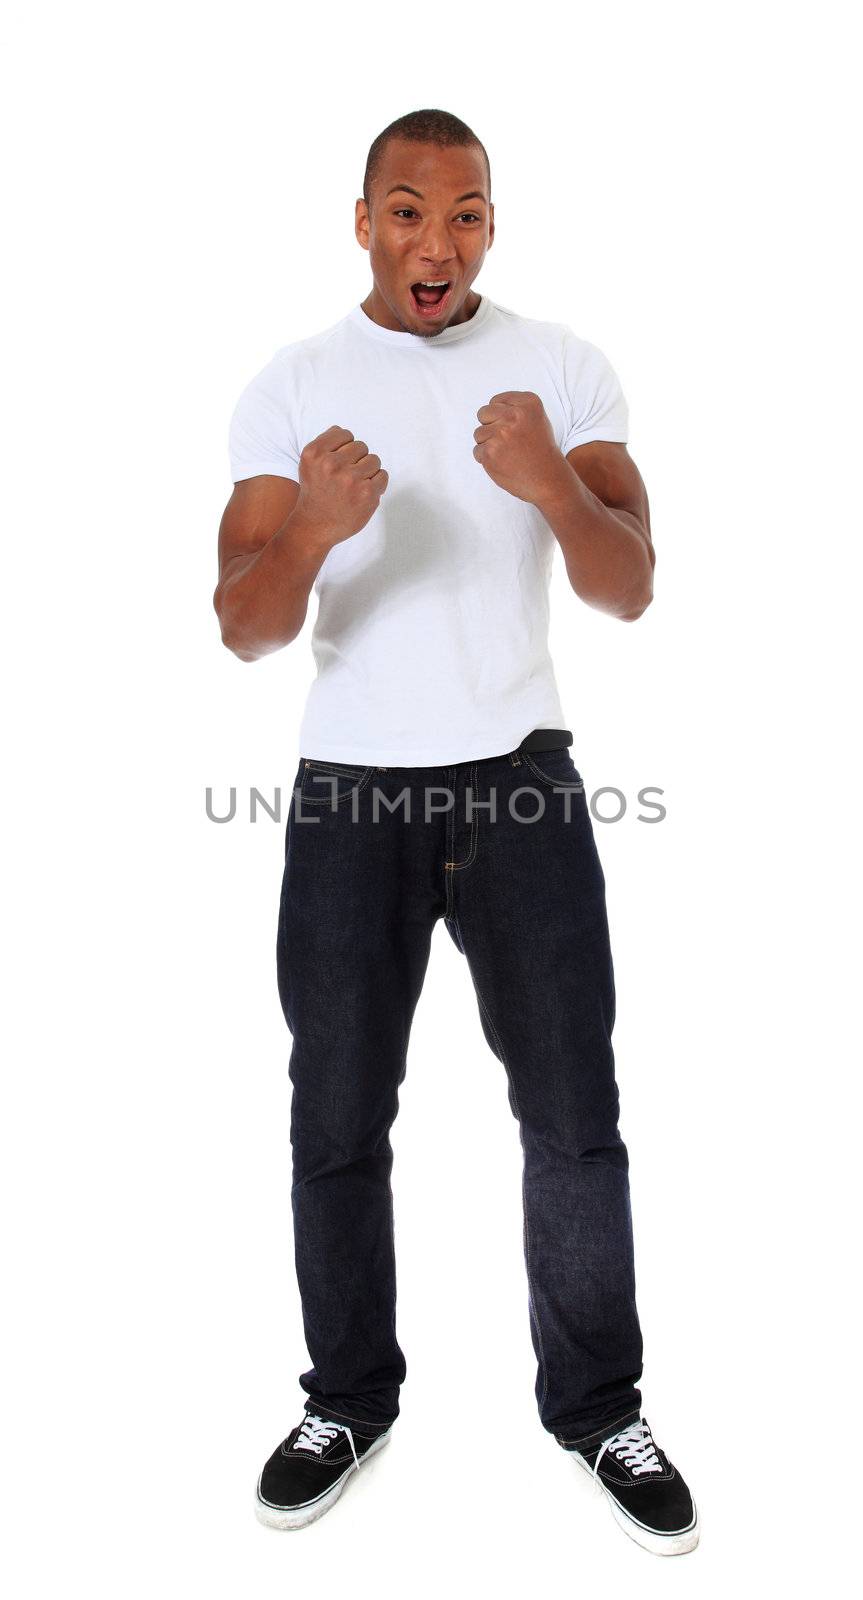 Attractive black man jubilating. All on white background.